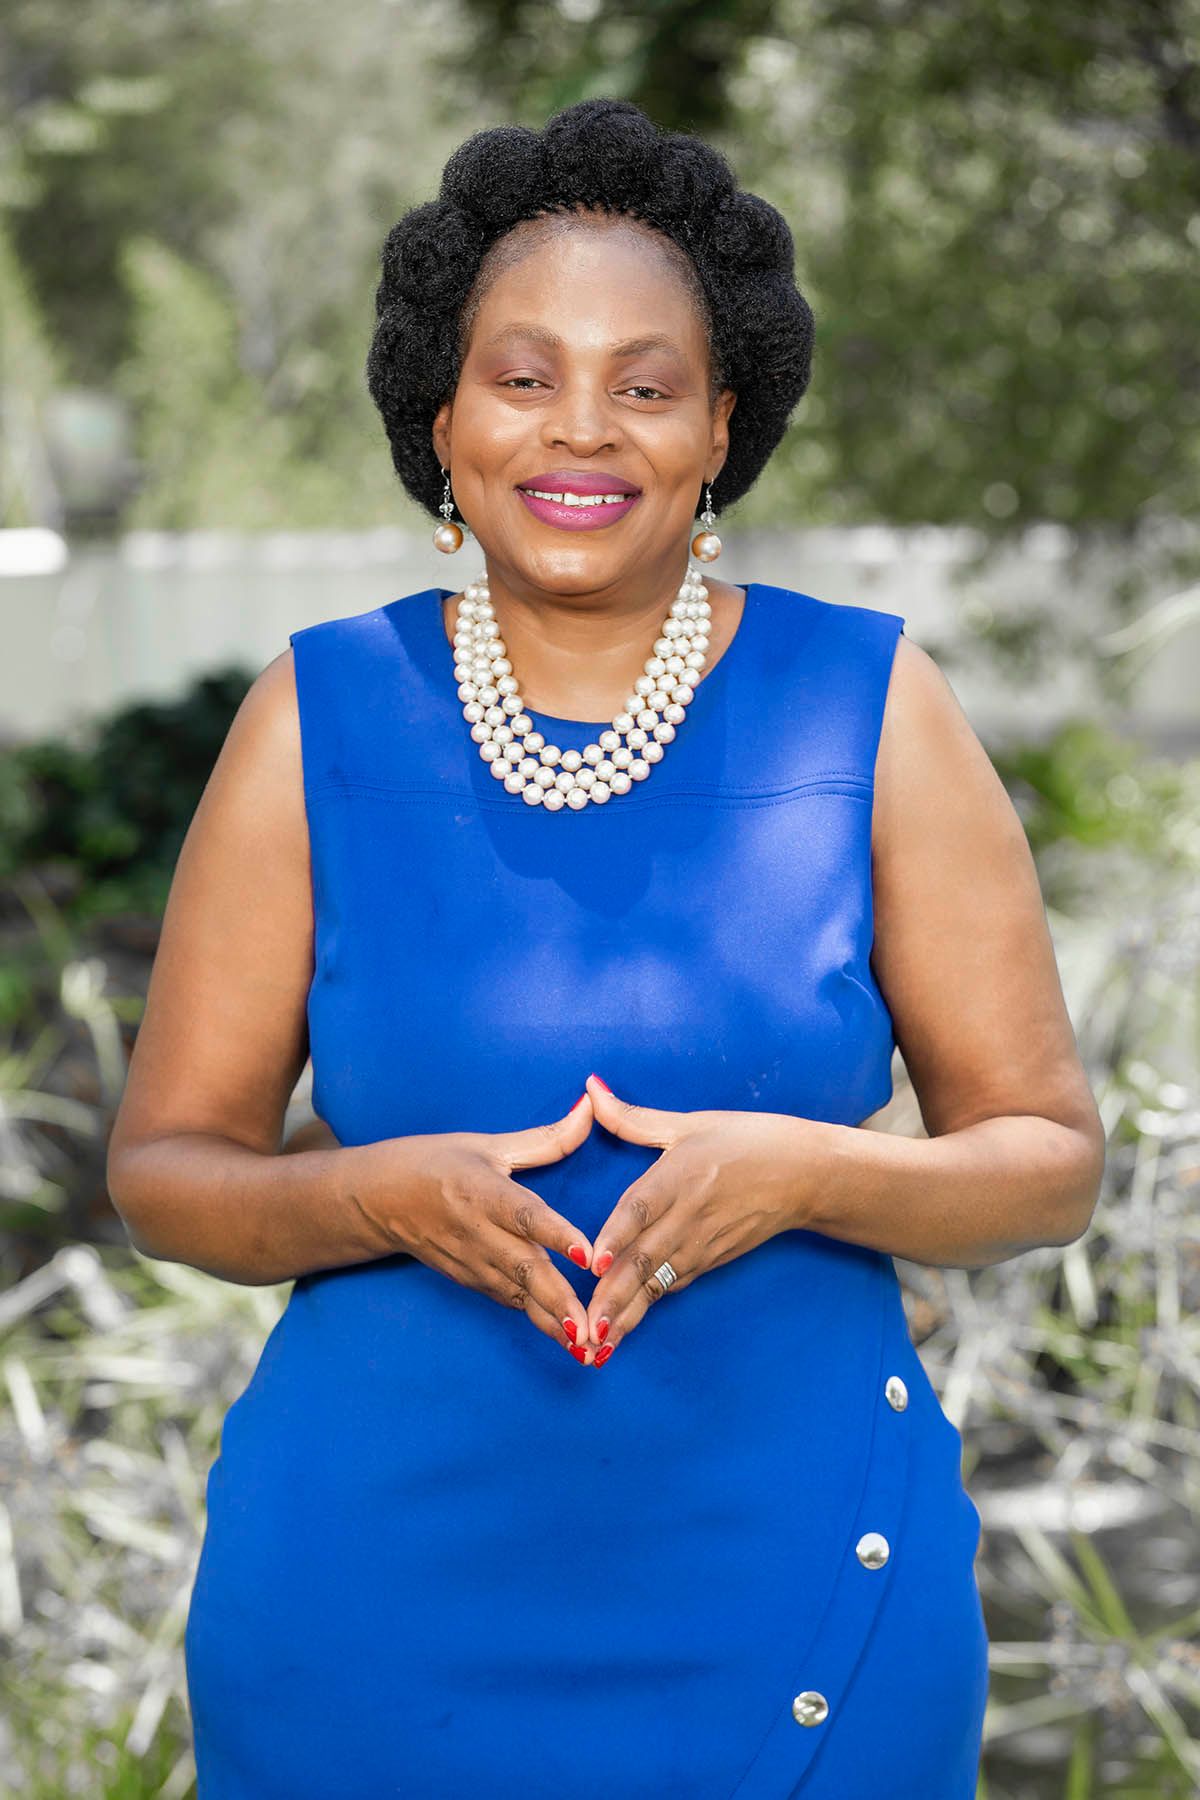 Francesca Nxedhlana, a black lady with short, natural black hair in a blue dress with pearls, smiling at the camera.